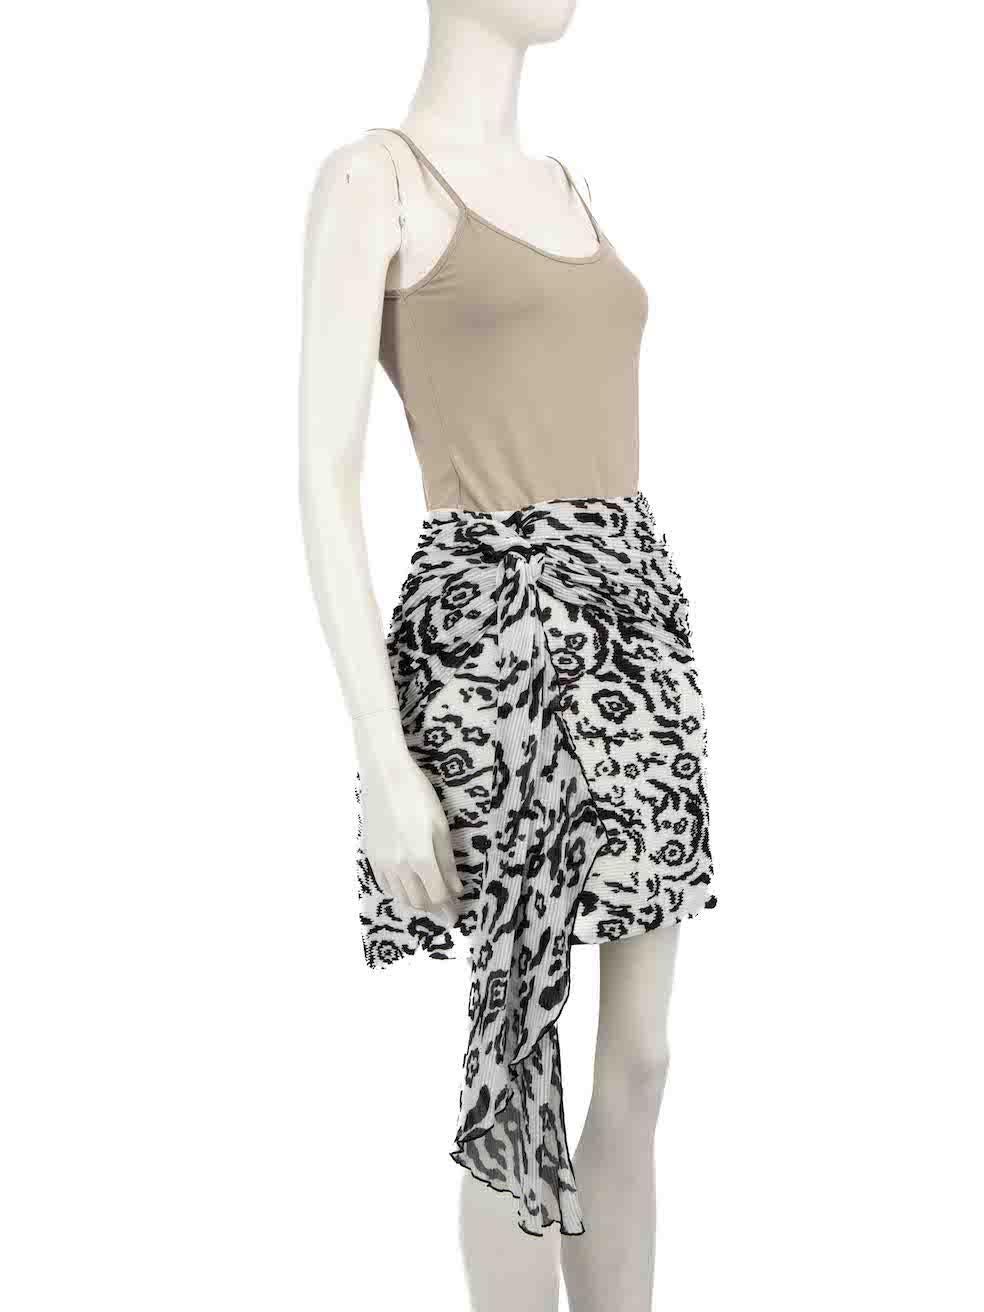 CONDITION is Never worn, with tags. No visible wear to skirt is evident on this new Self-Portrait designer resale item.
 
 
 
 Details
 
 
 White
 
 Polyester
 
 Skirt
 
 Black leopard print
 
 Mini
 
 Plissé pleats
 
 Draped detail
 
 Back zip and